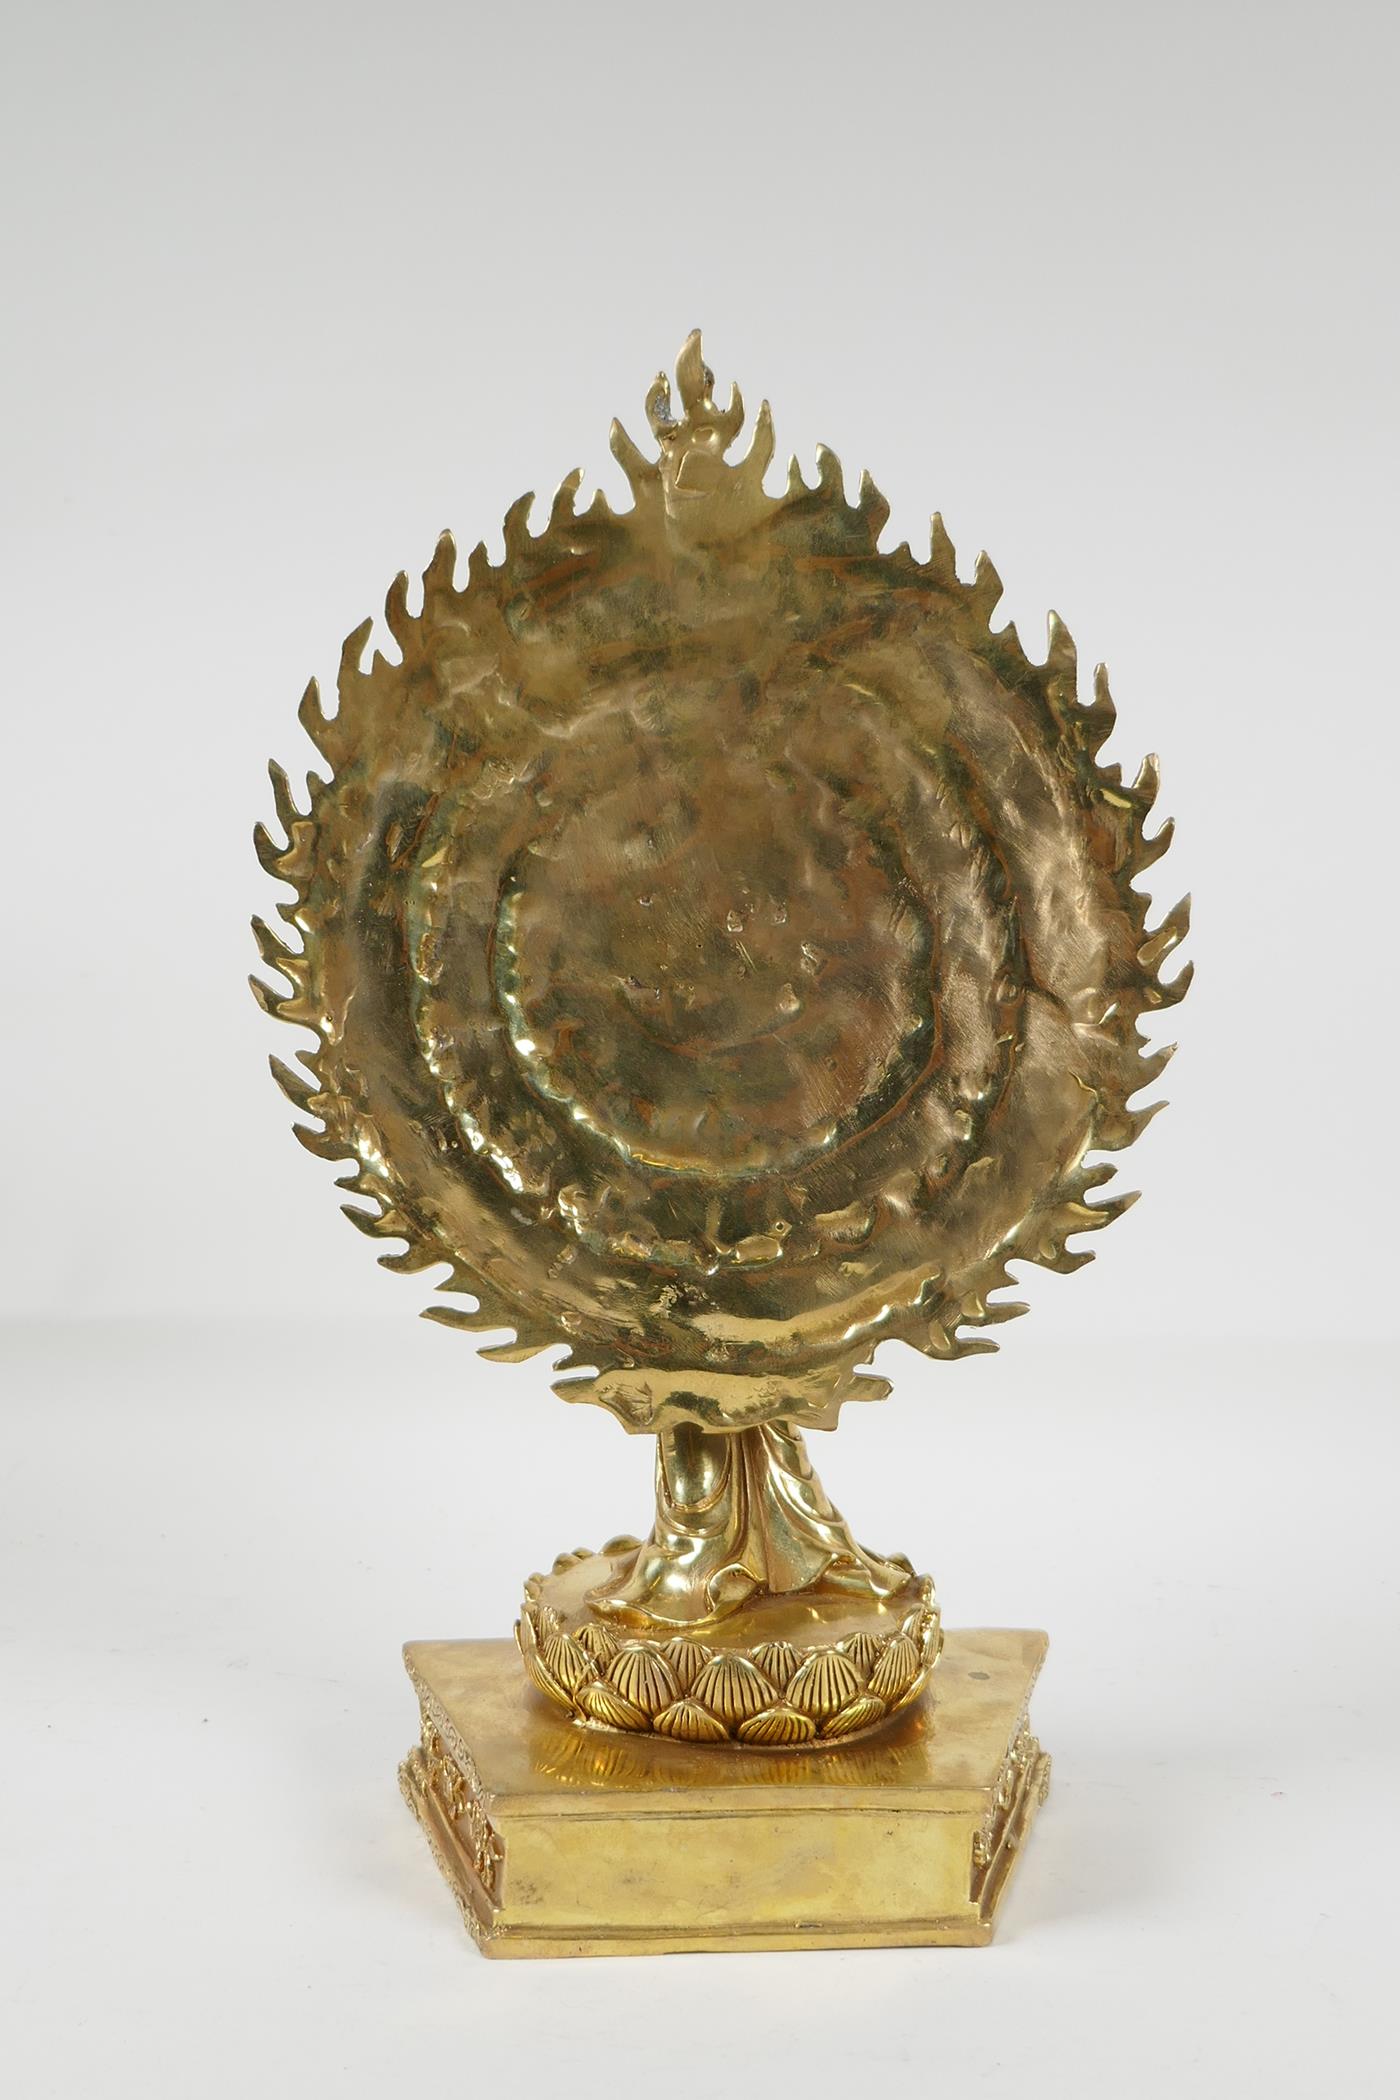 A Sino-Tibetan gilt bronze of a deity with many arms, on a lotus flower, 12½" high - Image 4 of 5